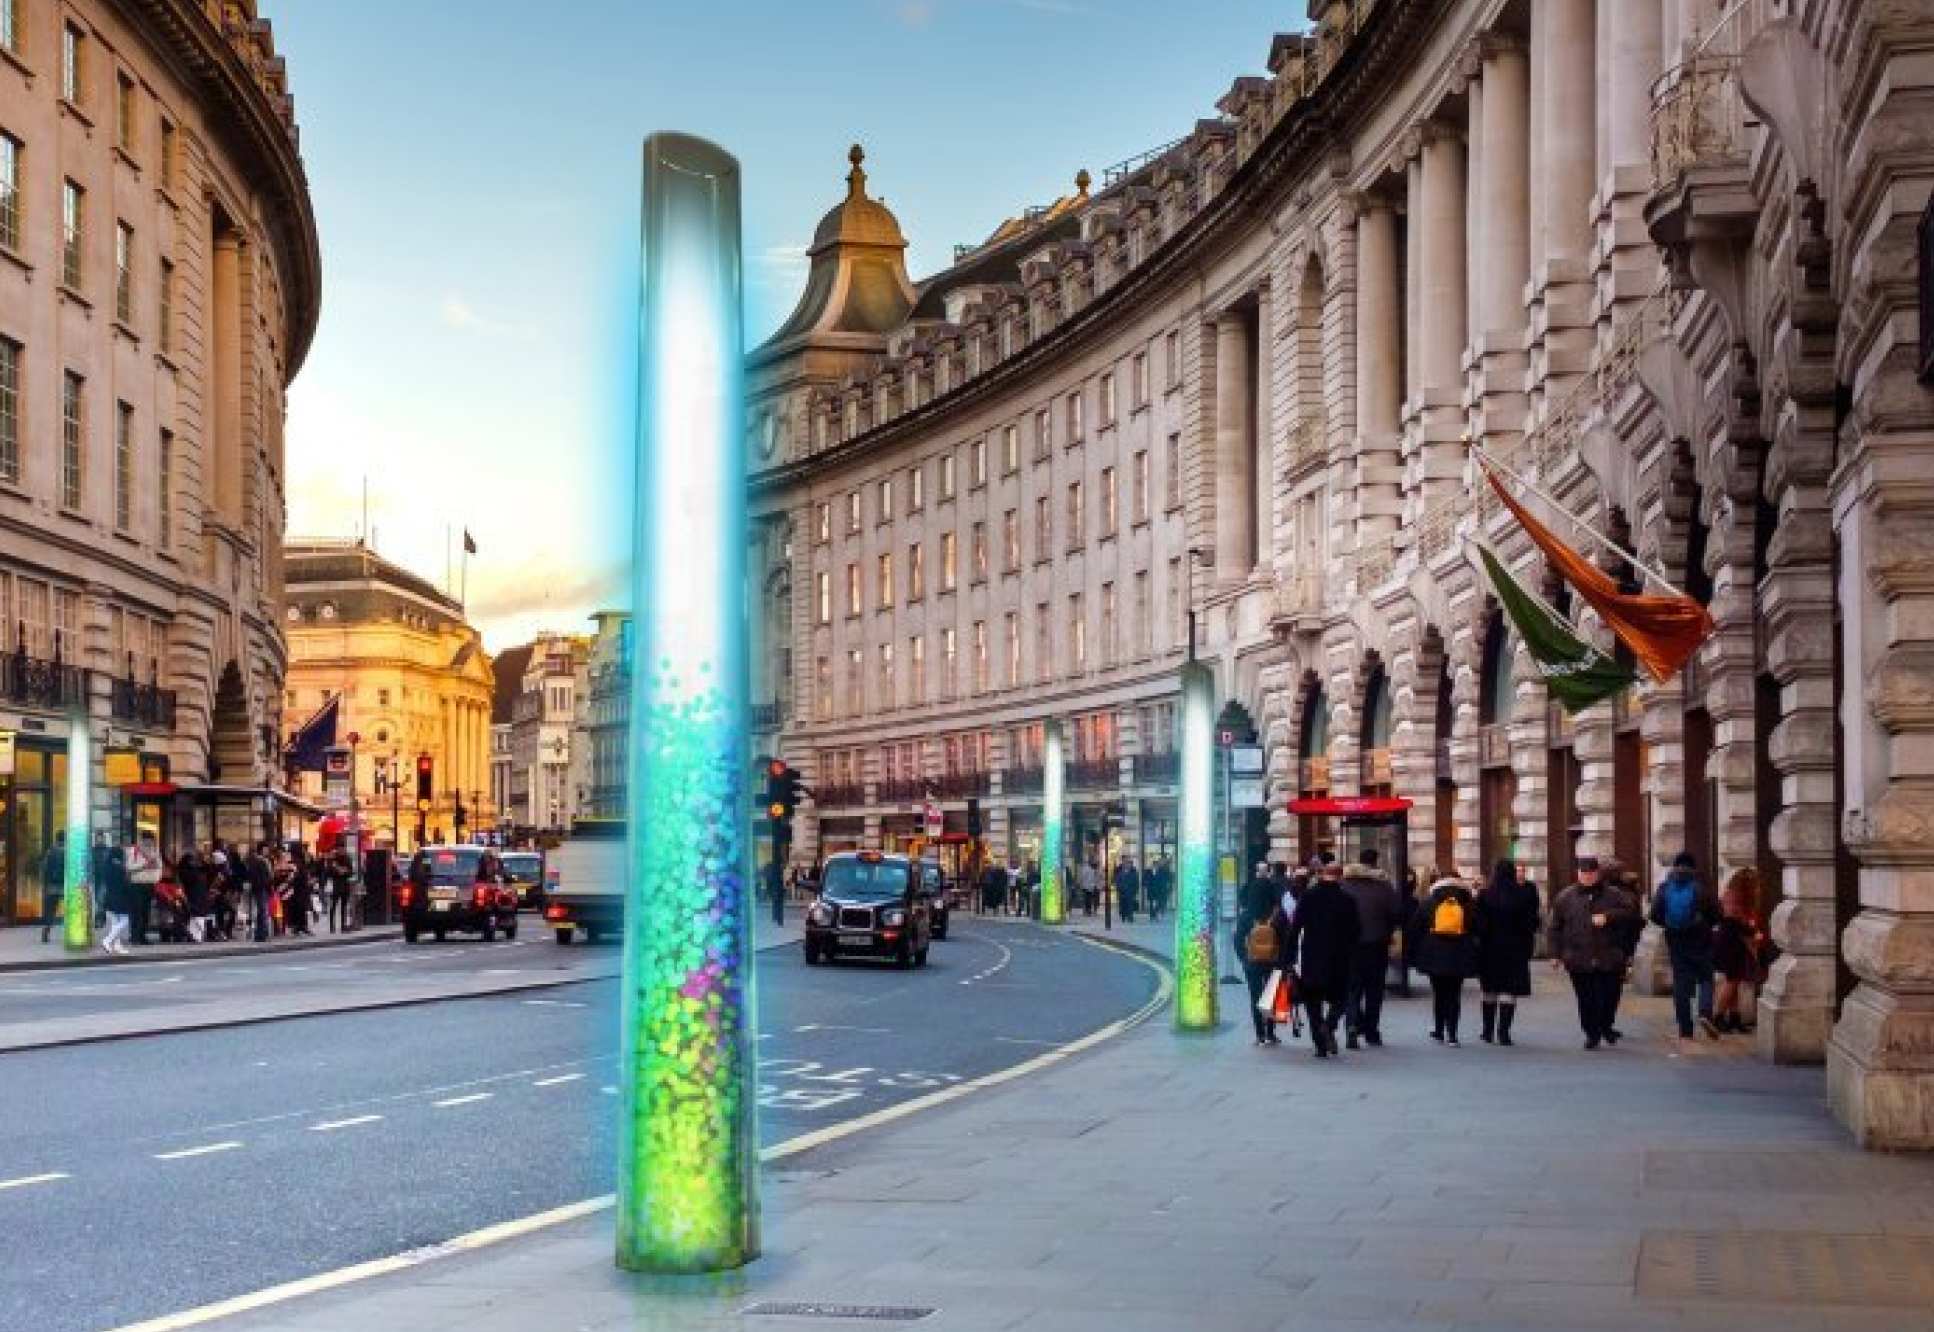 What Pluvo would look like on Regent Street